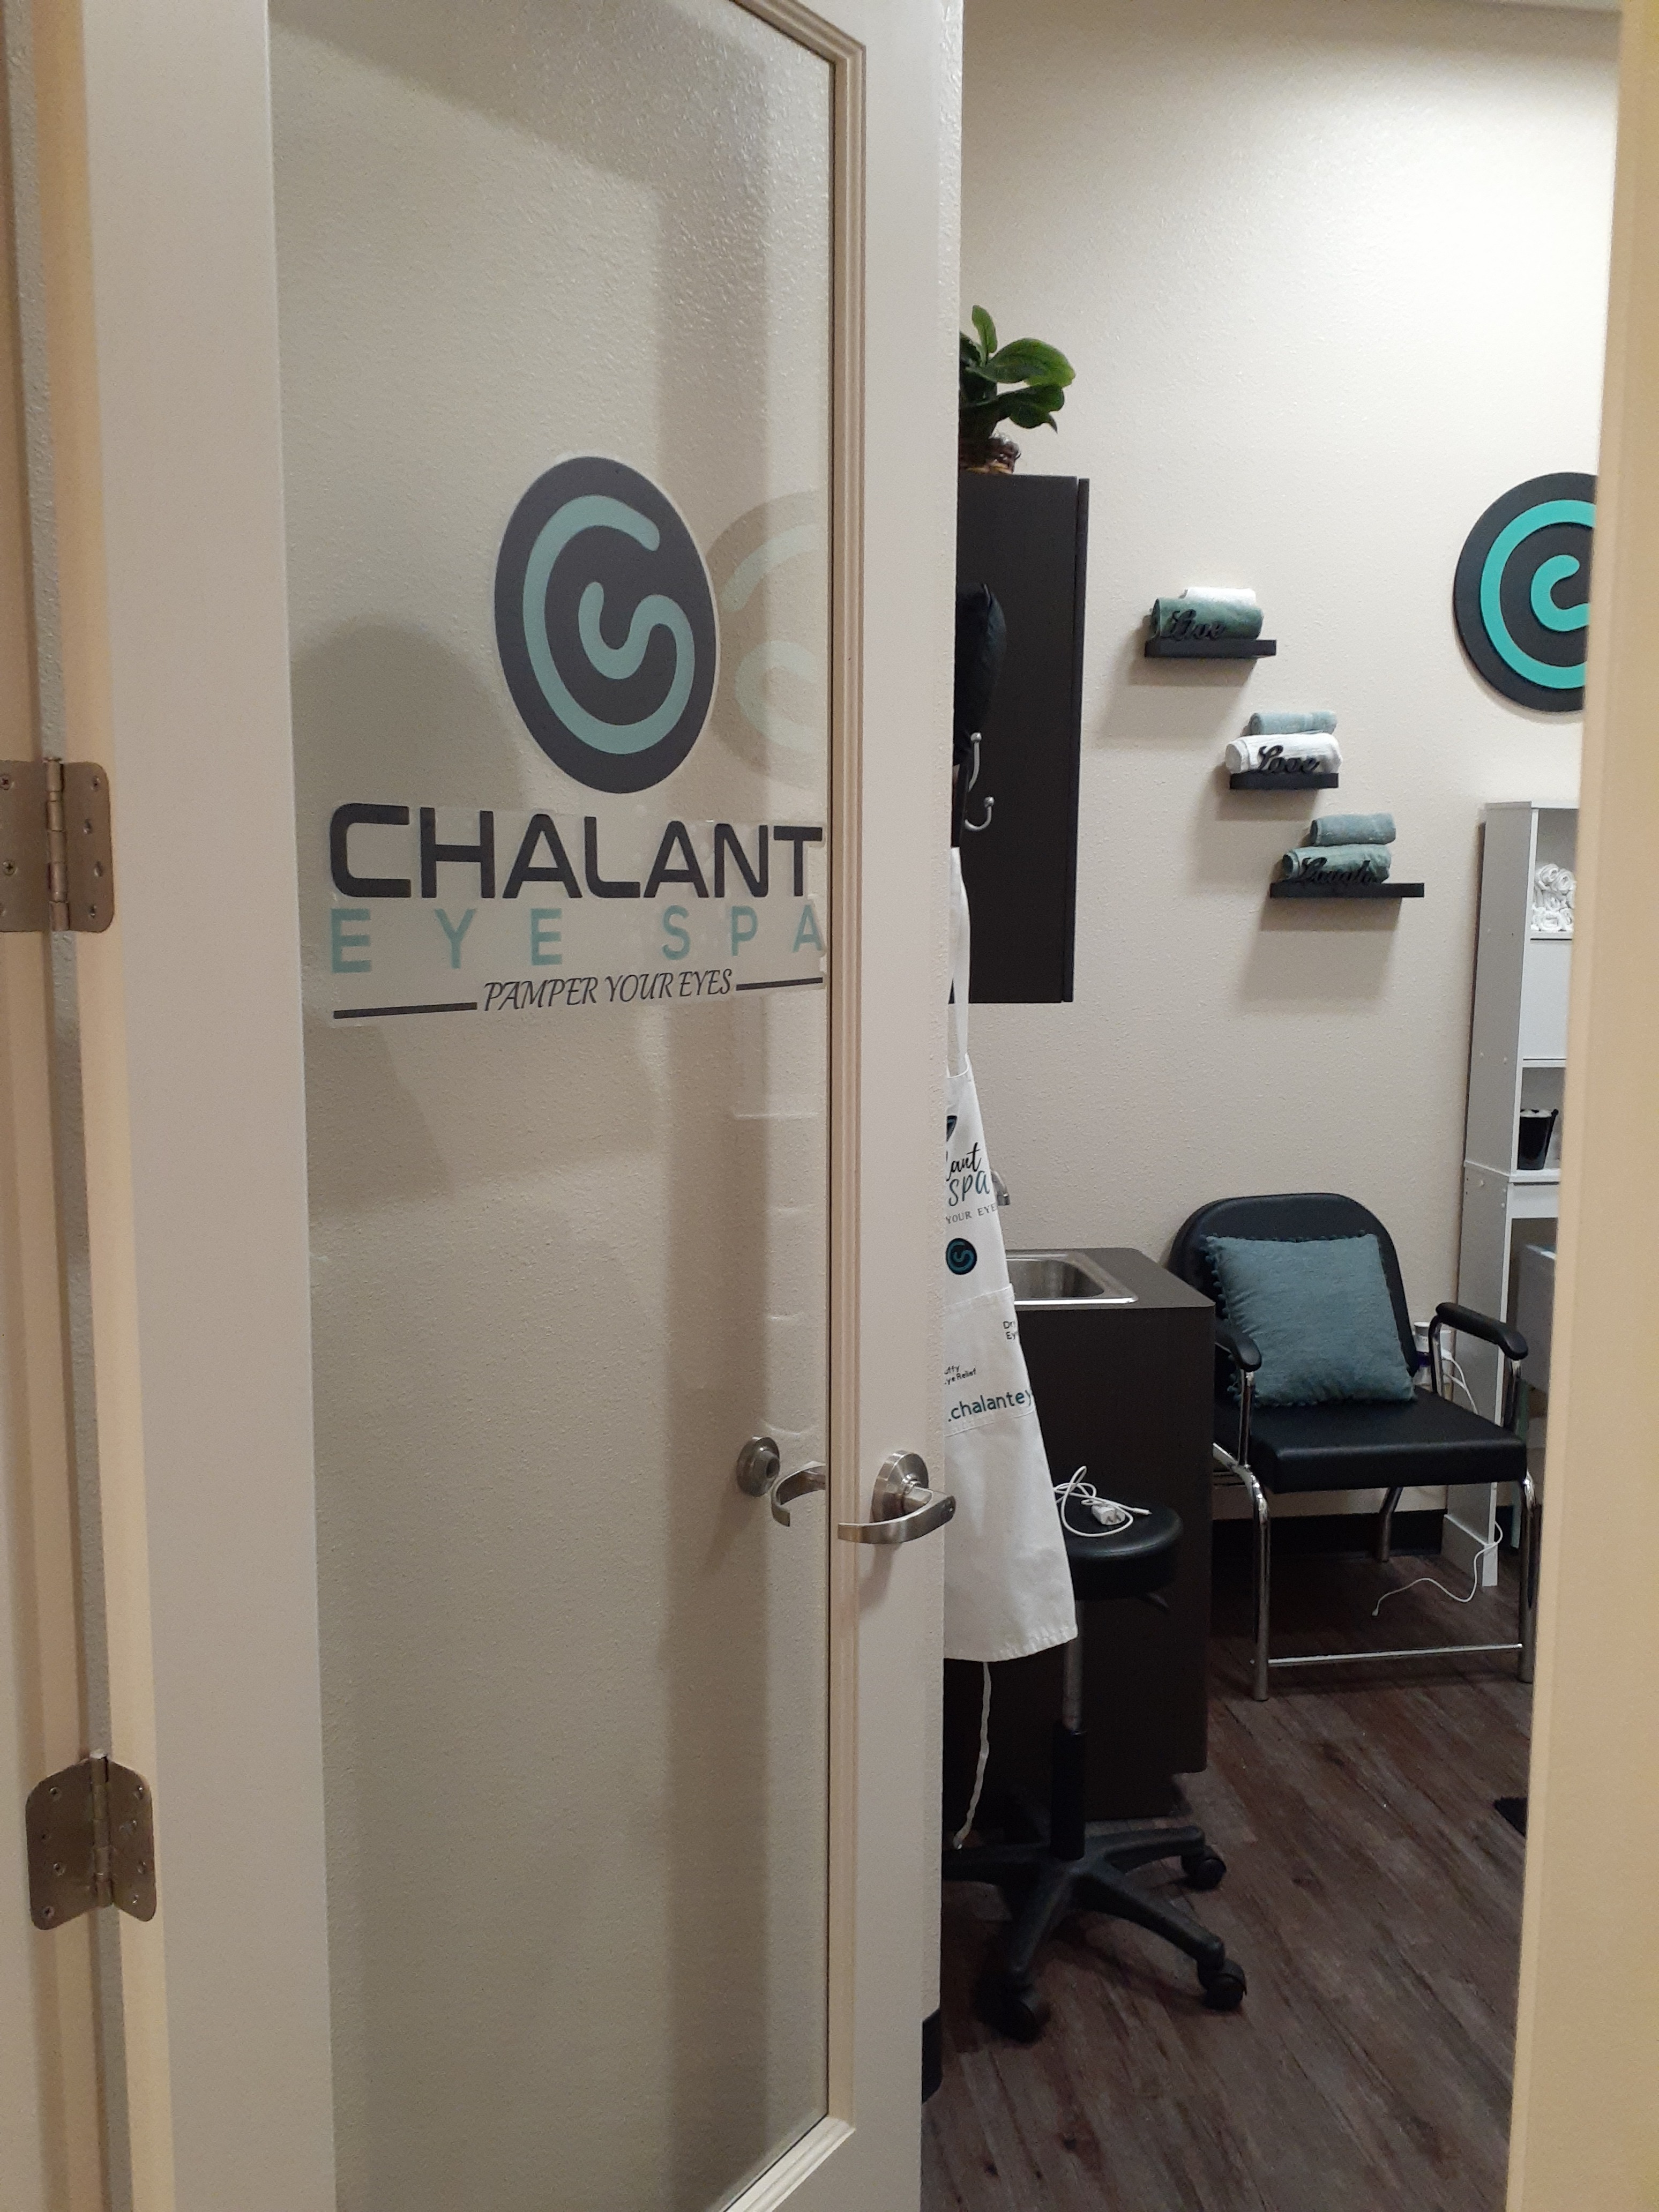 Chalant Eye Spa & Vision Wellness program Aims to Reduce Digital Eye Strain in the Workplace